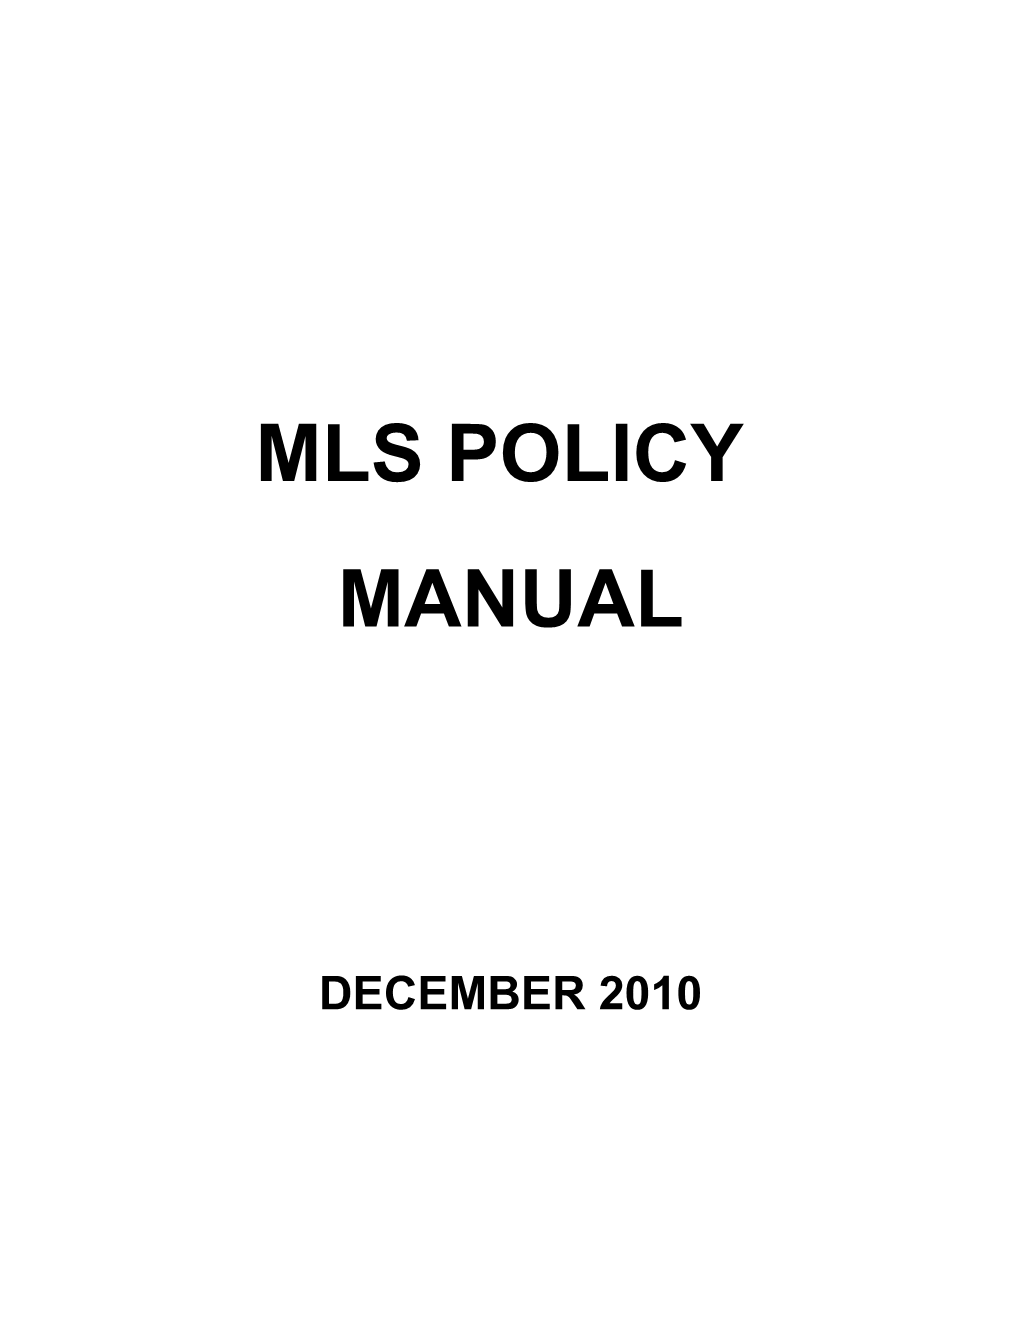 Multiple Listing Service Policy Statements